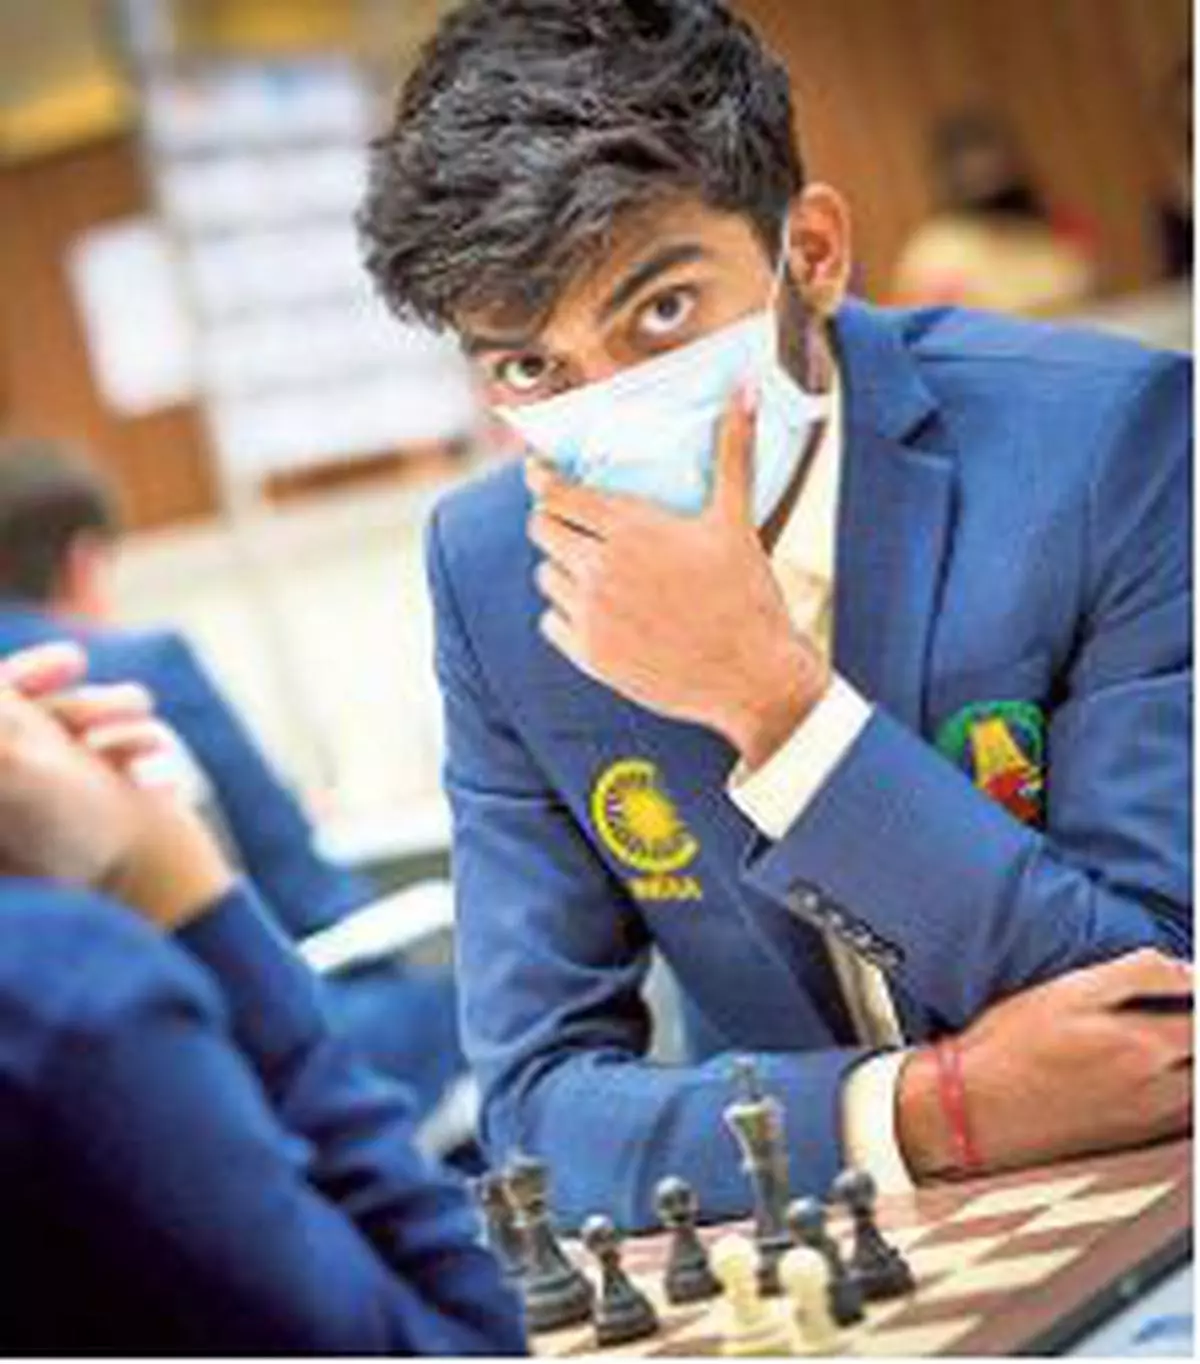 Gukesh: I wanted to enjoy the Chess Olympiad, while also aiming for medals  - Times of India